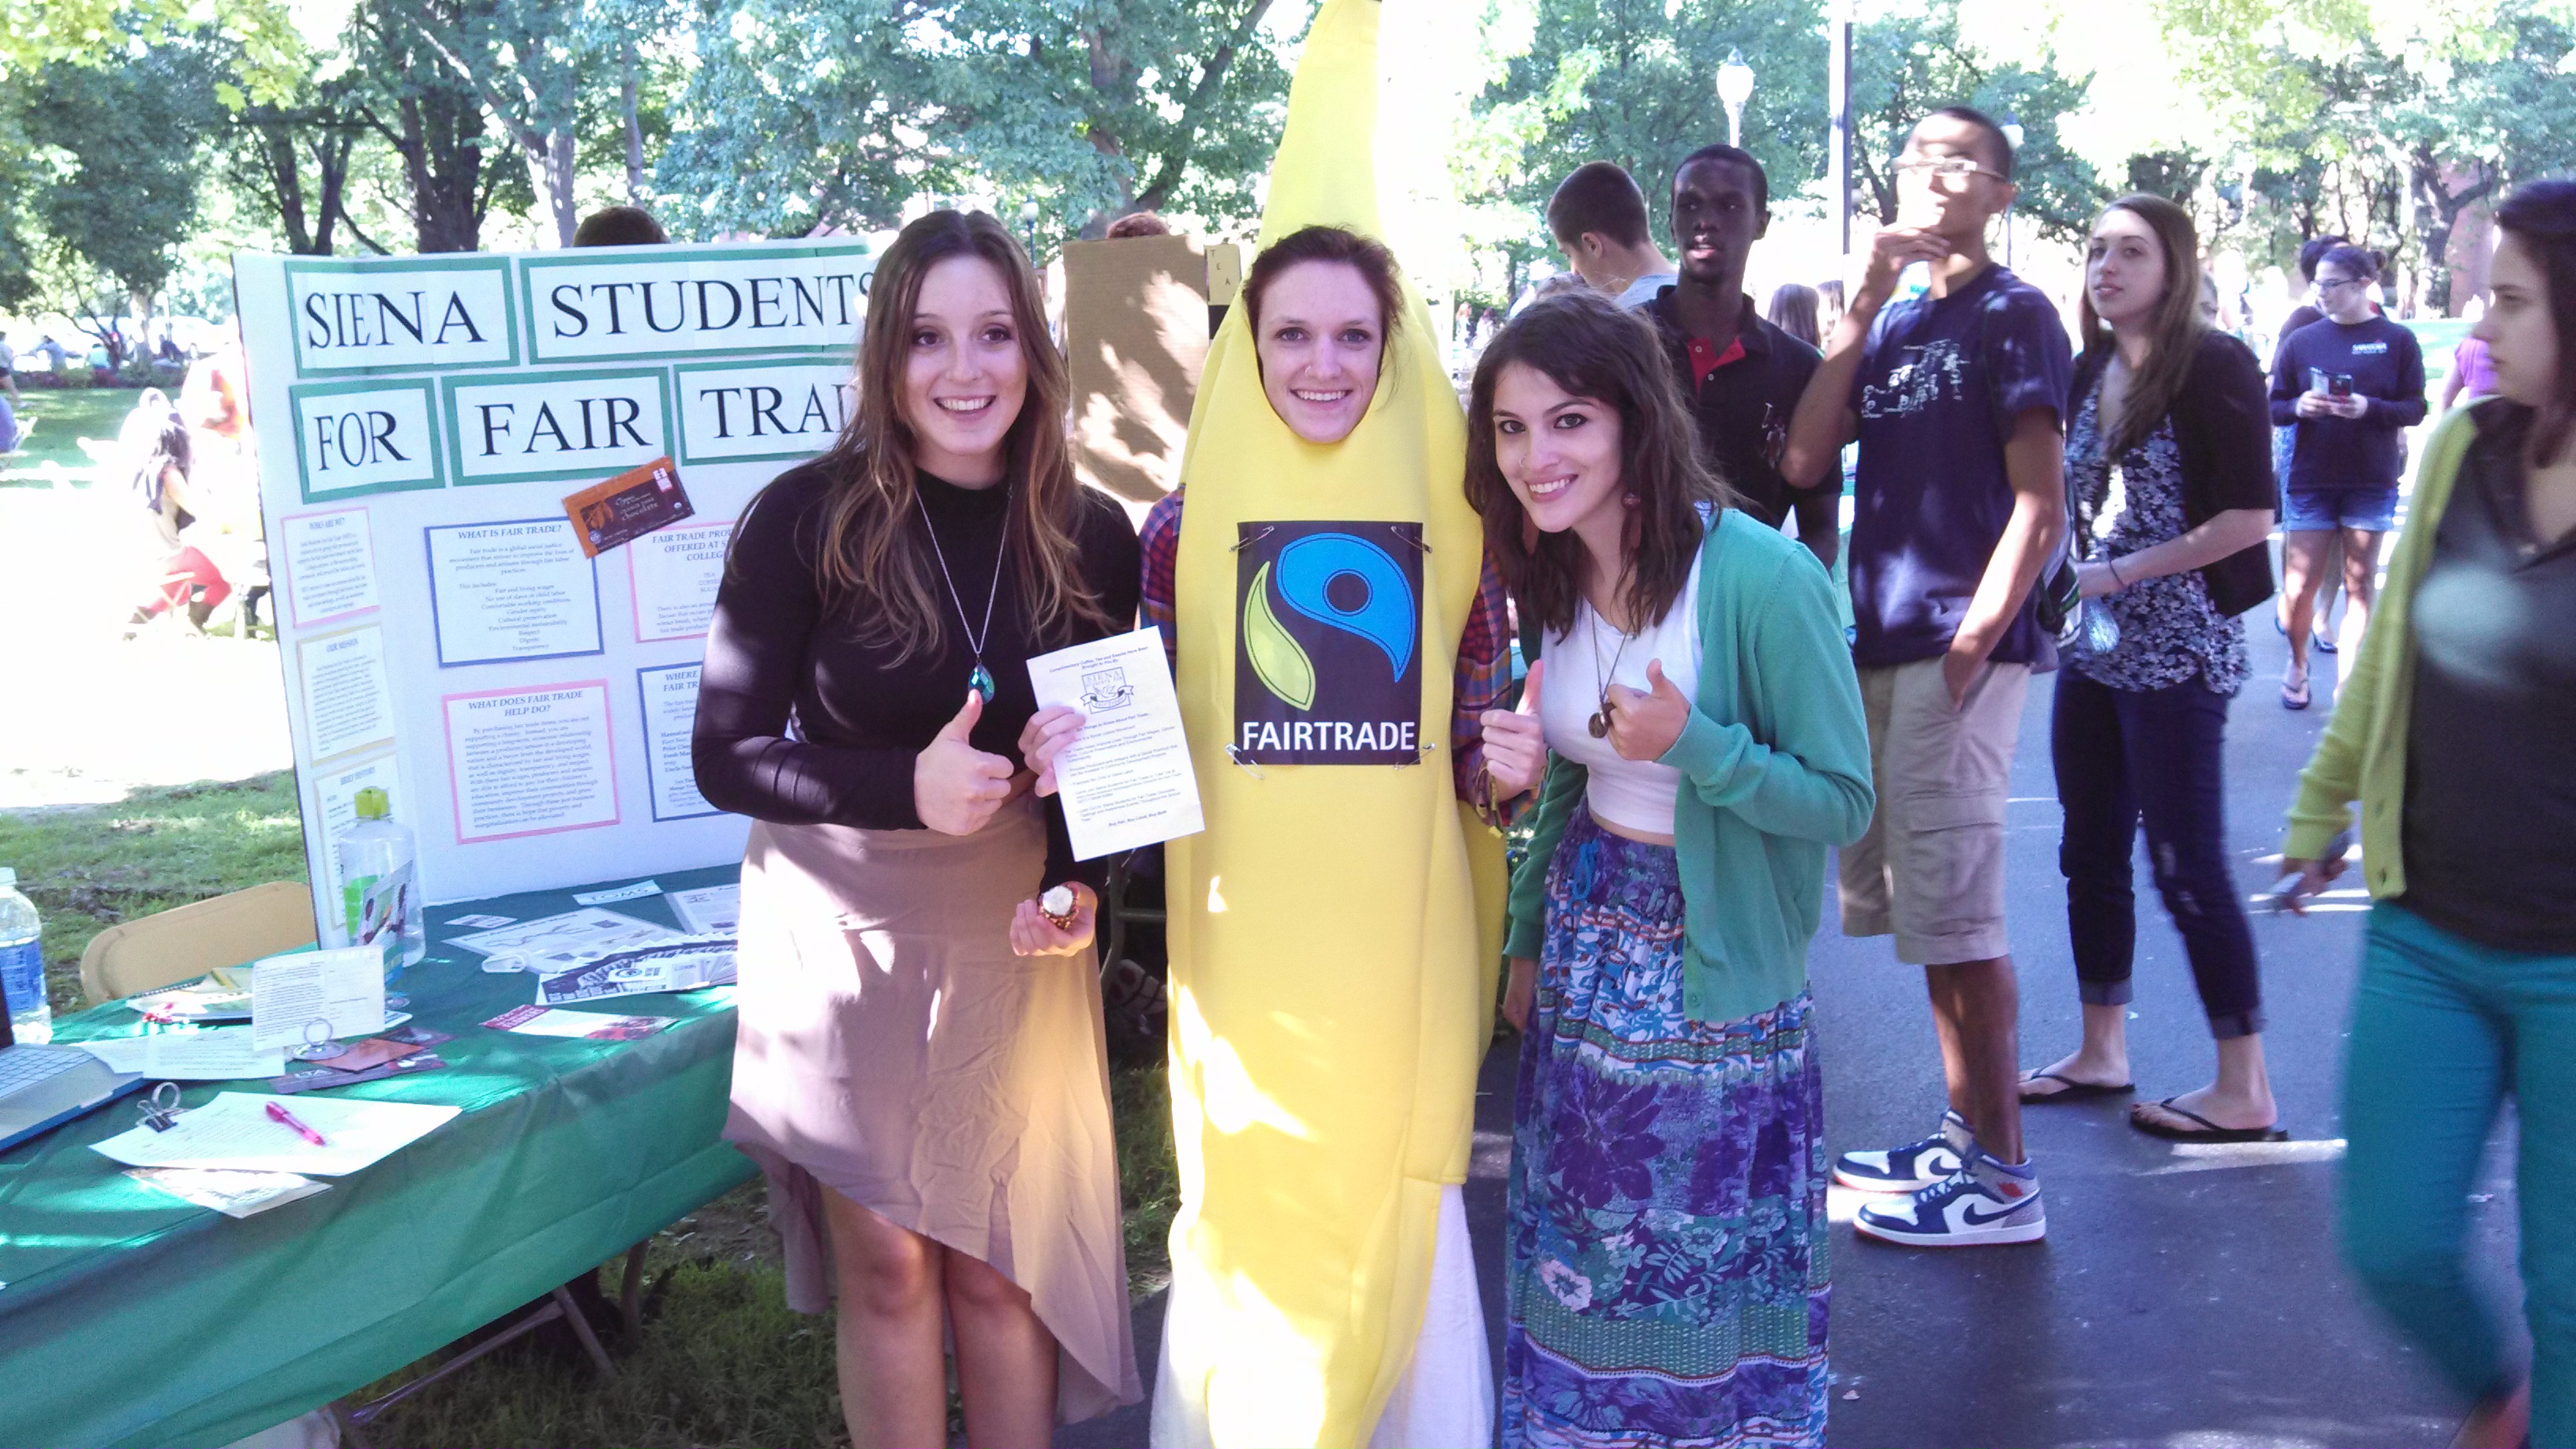 From left, Monika Ostrowidzki, Casey Gallagher and Andreia Marcuccio promote Siena Students for Fair Trade at a college-wide club fair in September 2013 at Siena College in Loudonville, N.Y. (Shannon O'Neill)